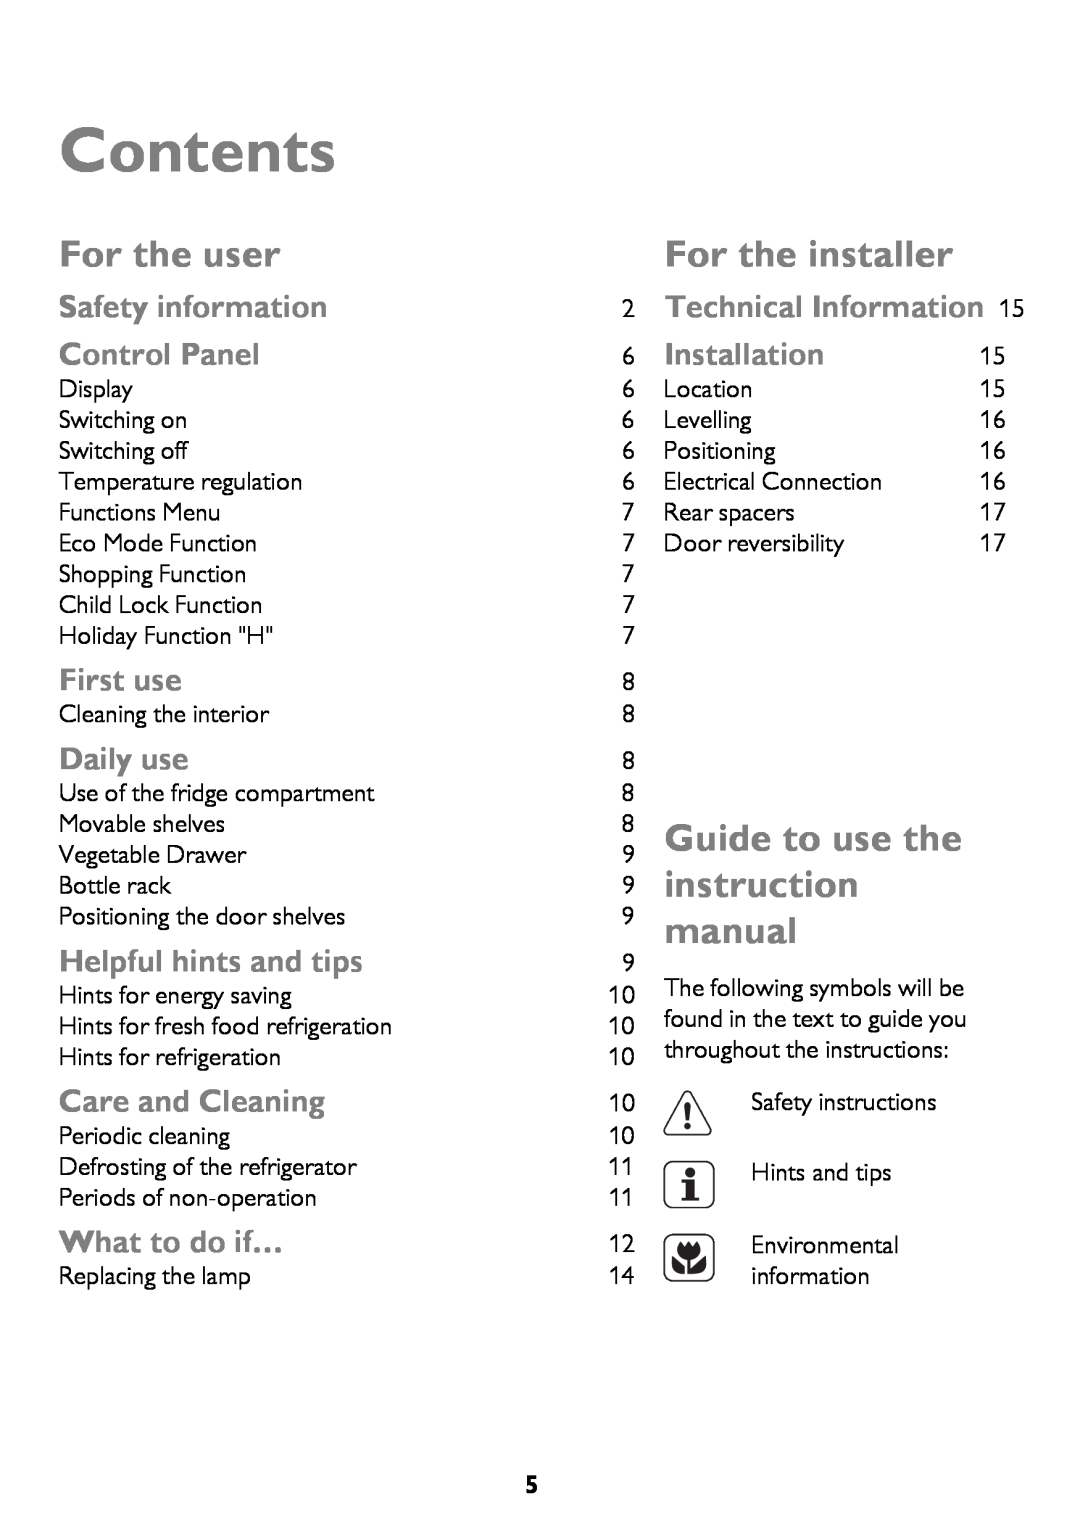 John Lewis JLLFW1602 Contents, For the user, For the installer, Guide to use the 9 instruction 9 manual, Control Panel 